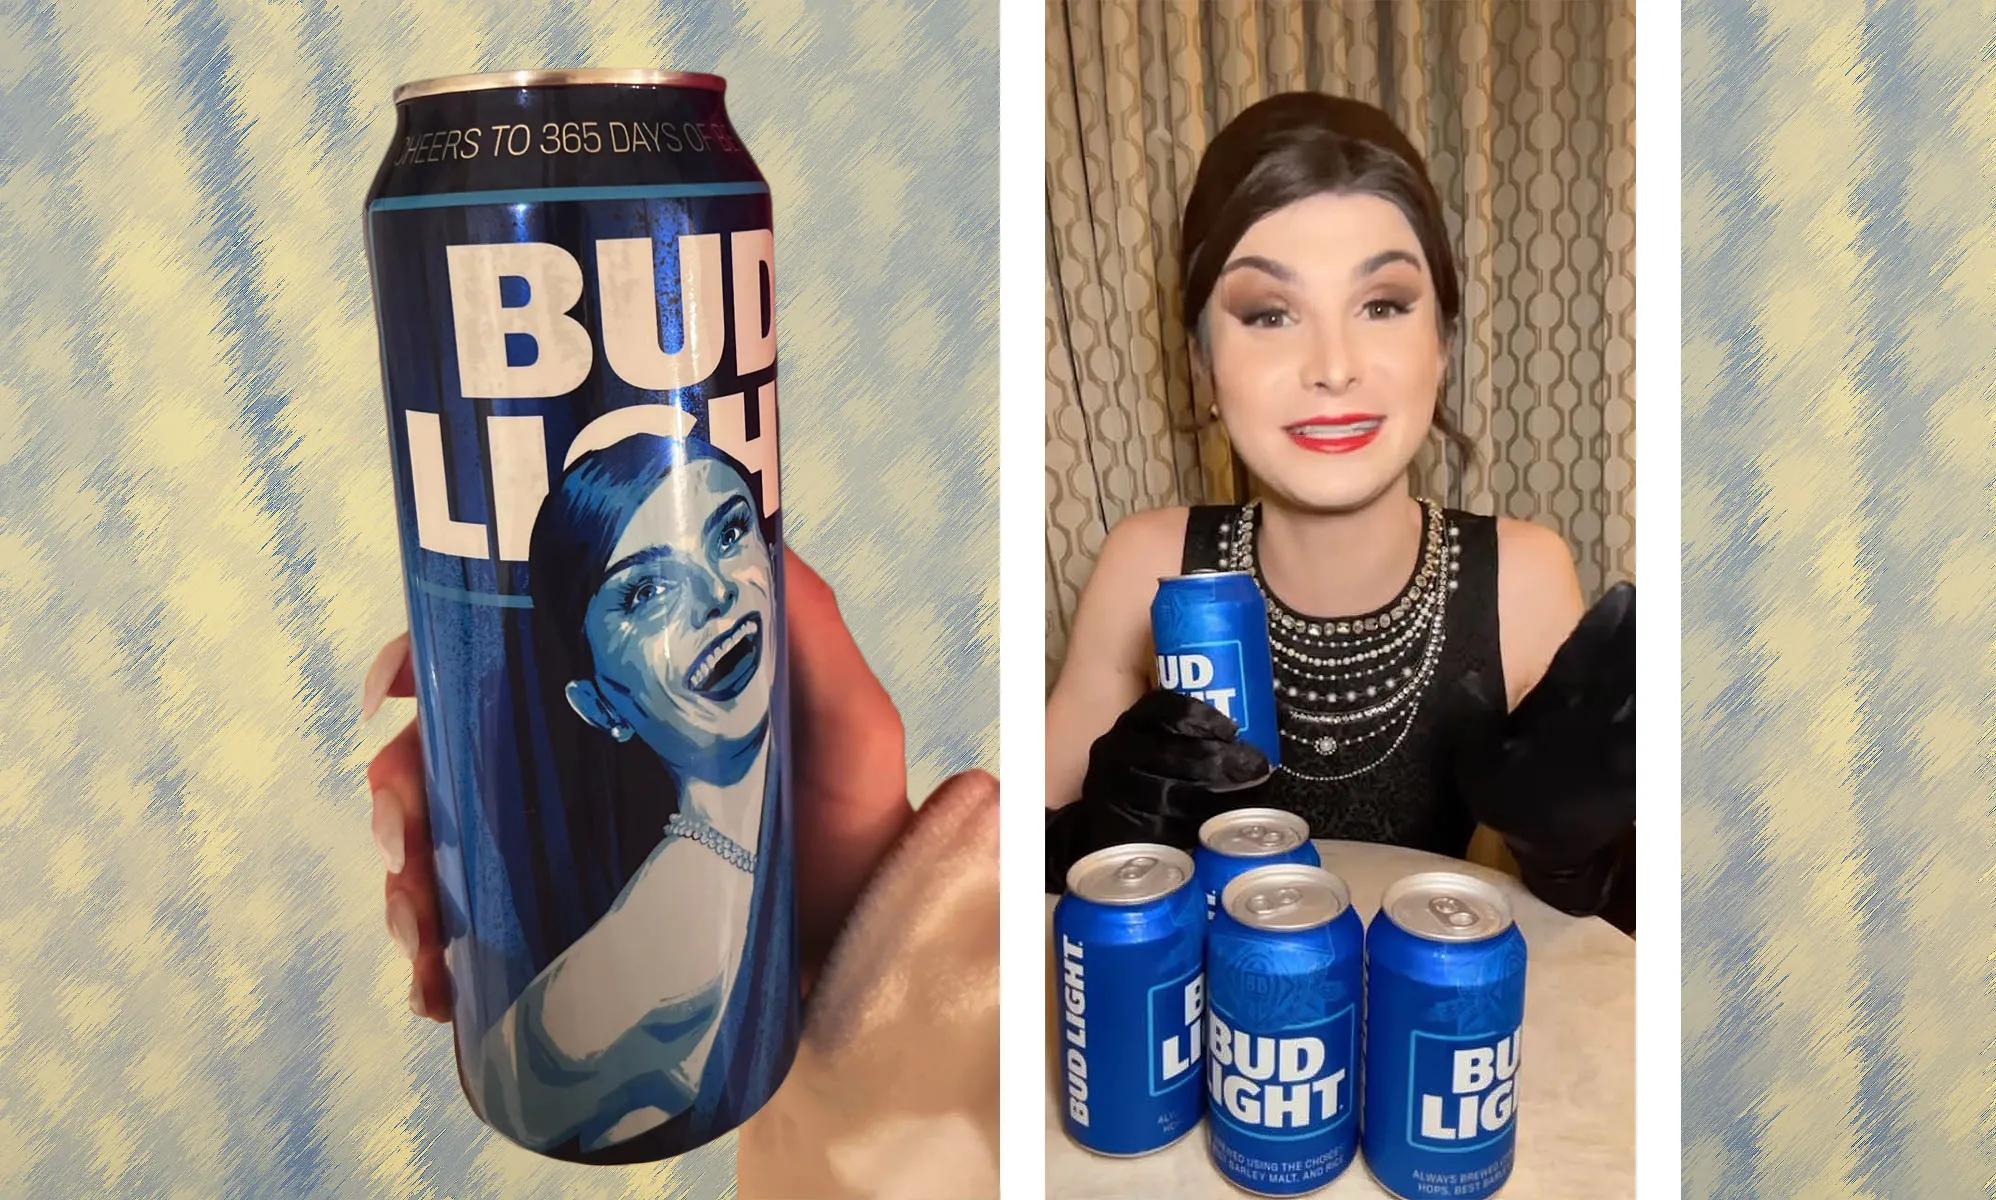 Bud Light to stay in our lane after Dylan Mulvaney trans backlash [Video]